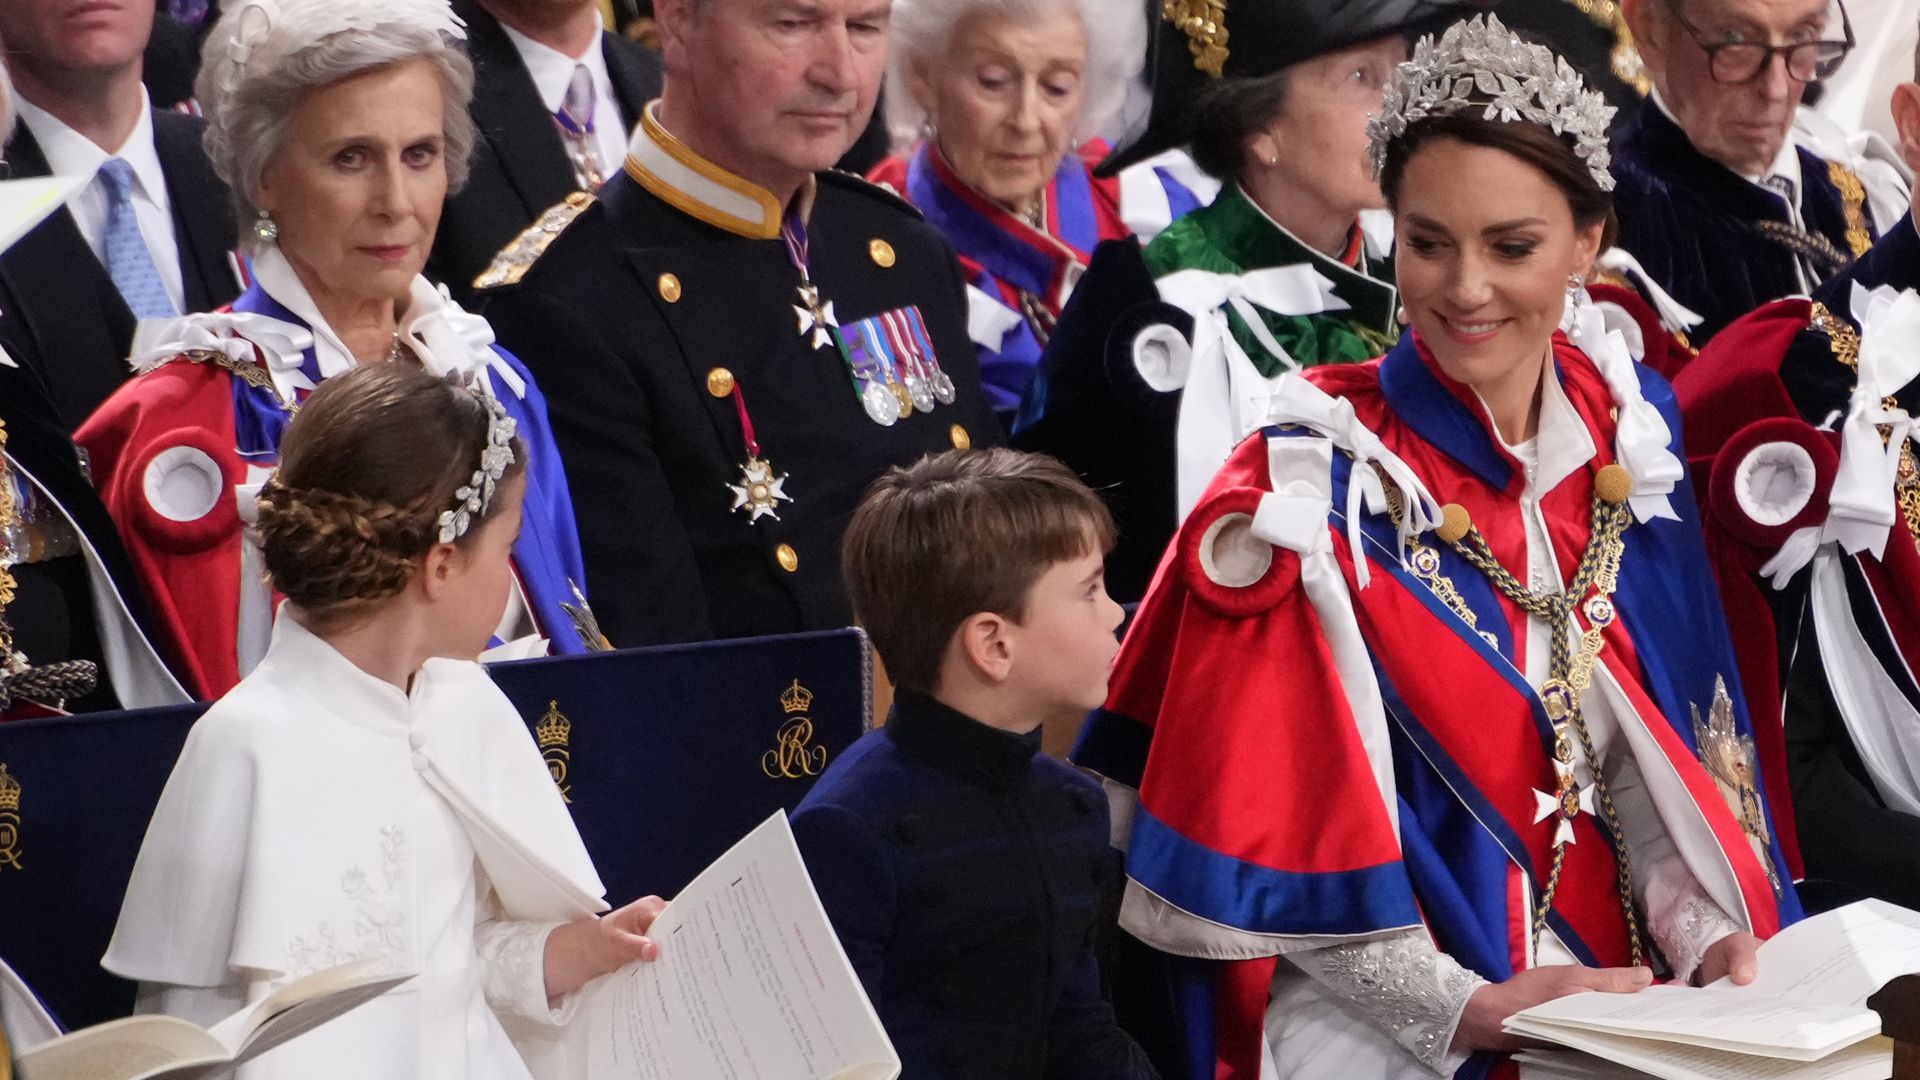 Princess Charlotte, Prince Louis and the Princess of Wales, and the Duke of Edinburgh during the Coronation of King Charles III and Queen Camilla